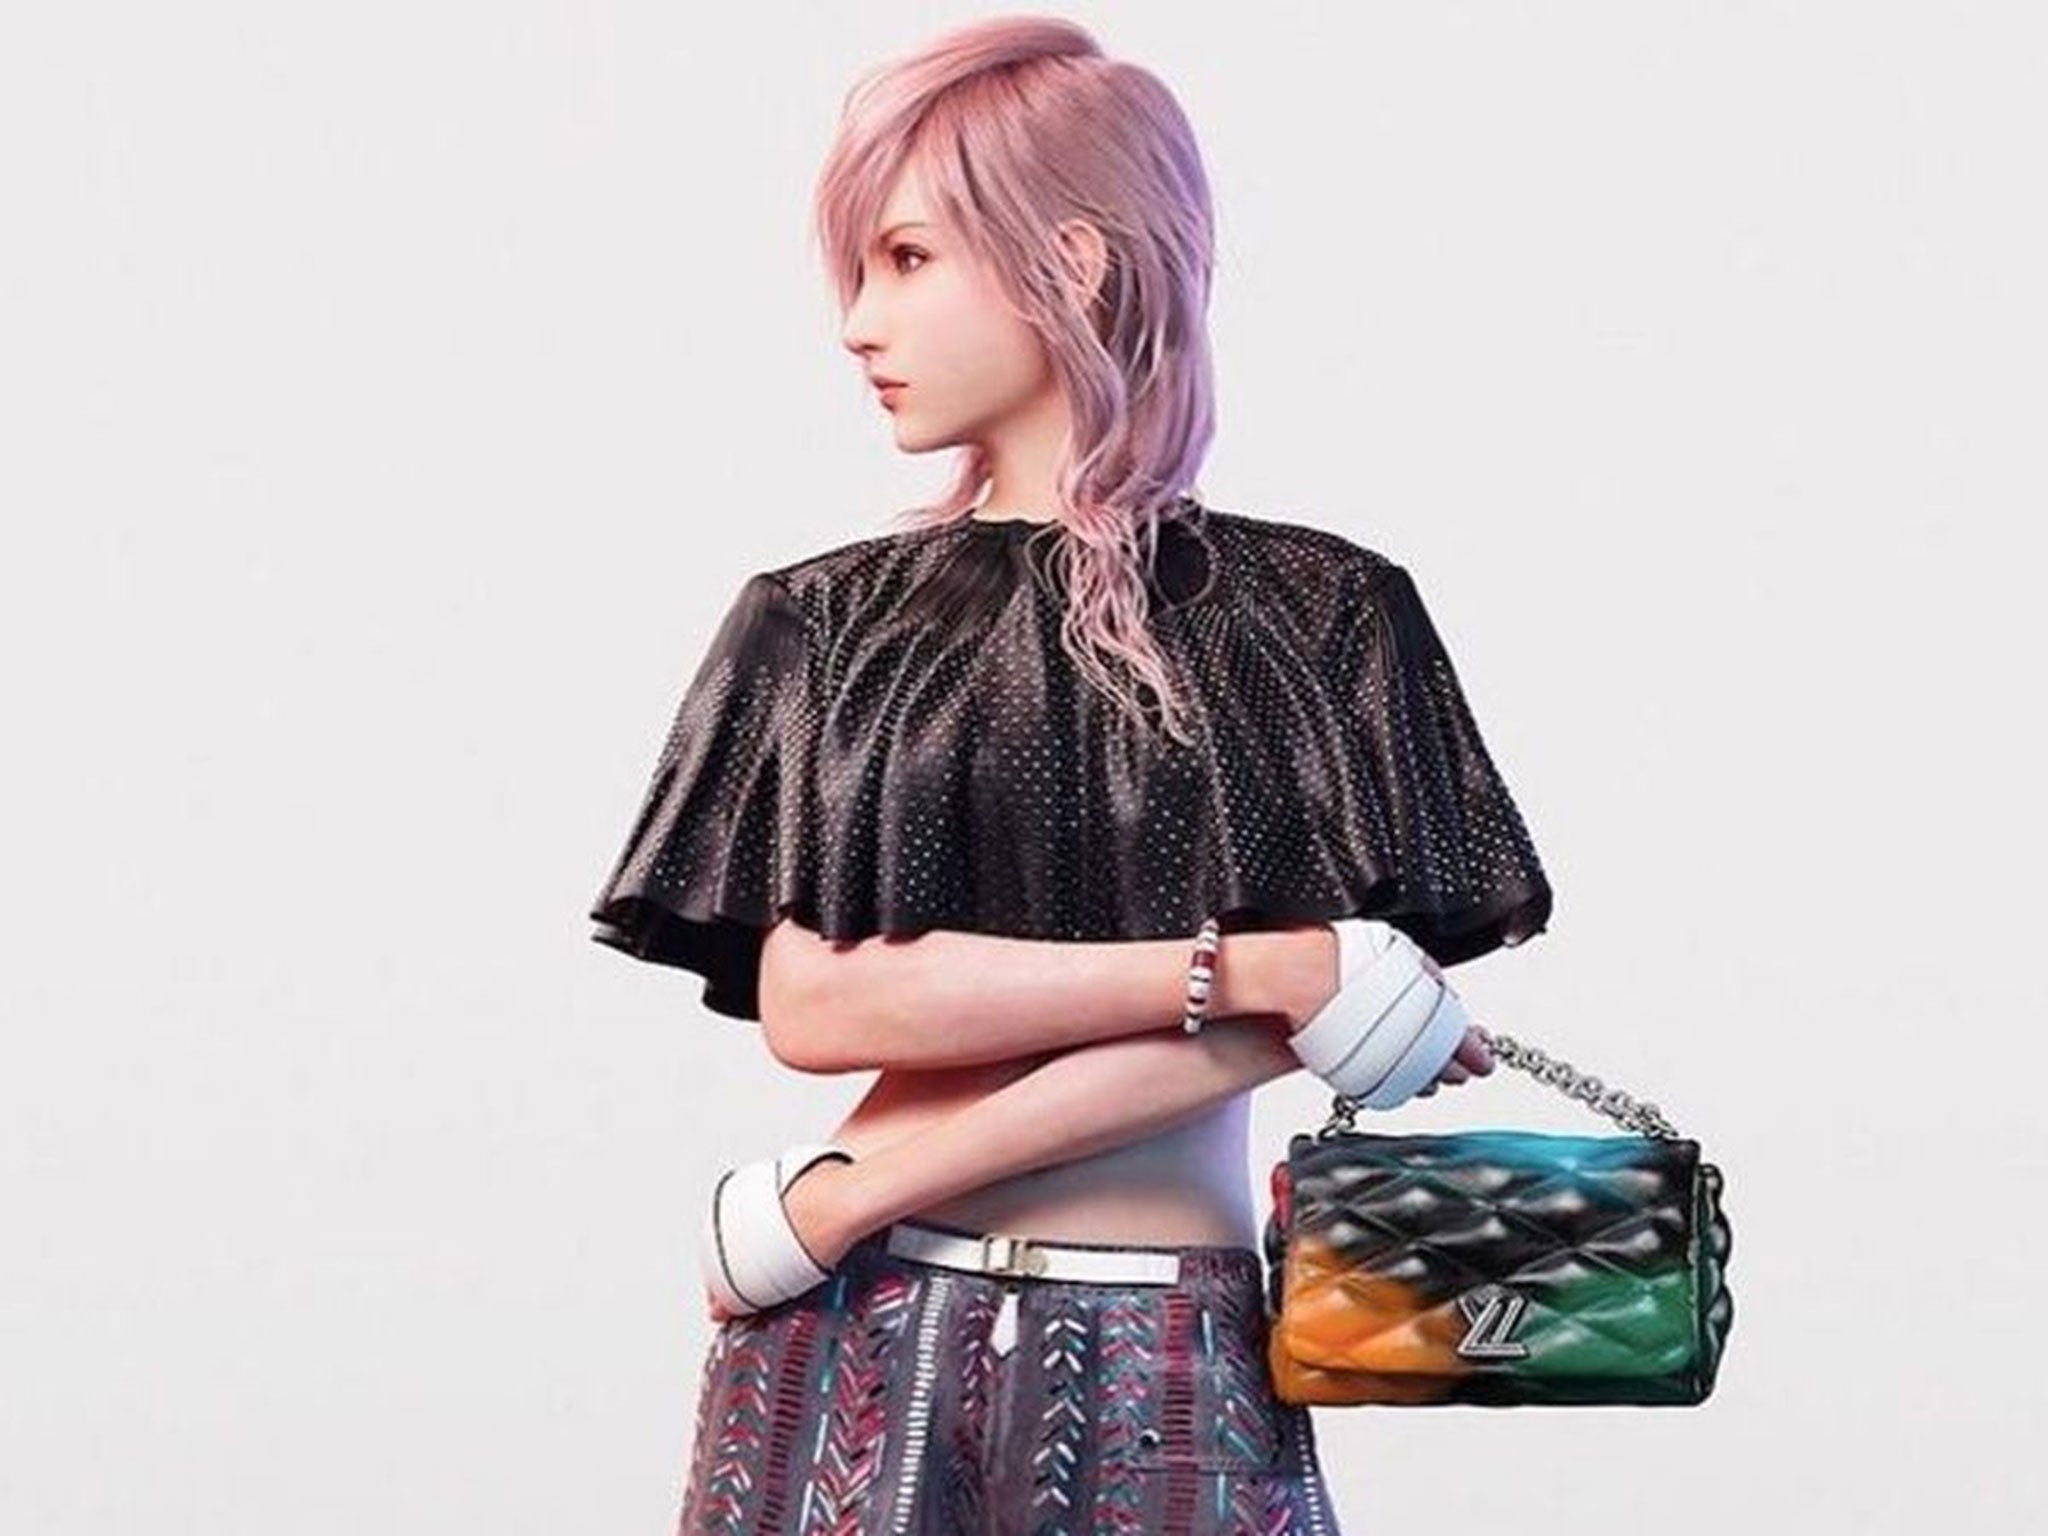 Pixel perfect: a preview of Lightning in the Vuitton ad, on Nicolas Ghesquière’s Instagram